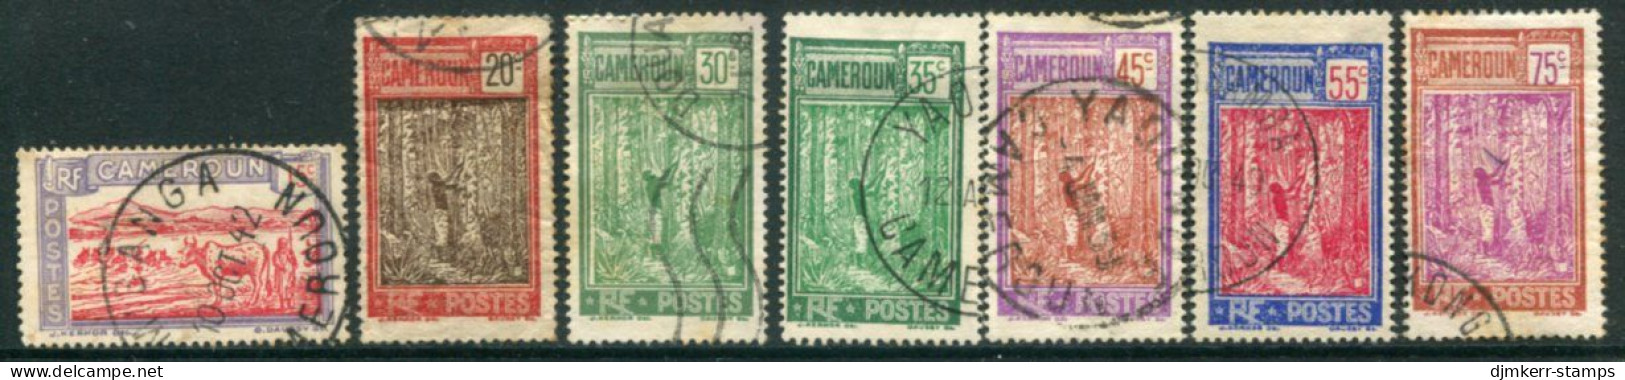 CAMEROUN 1927-38 Definitive 15C. - 75C. Used.  Yv.127, 134-40 - Used Stamps